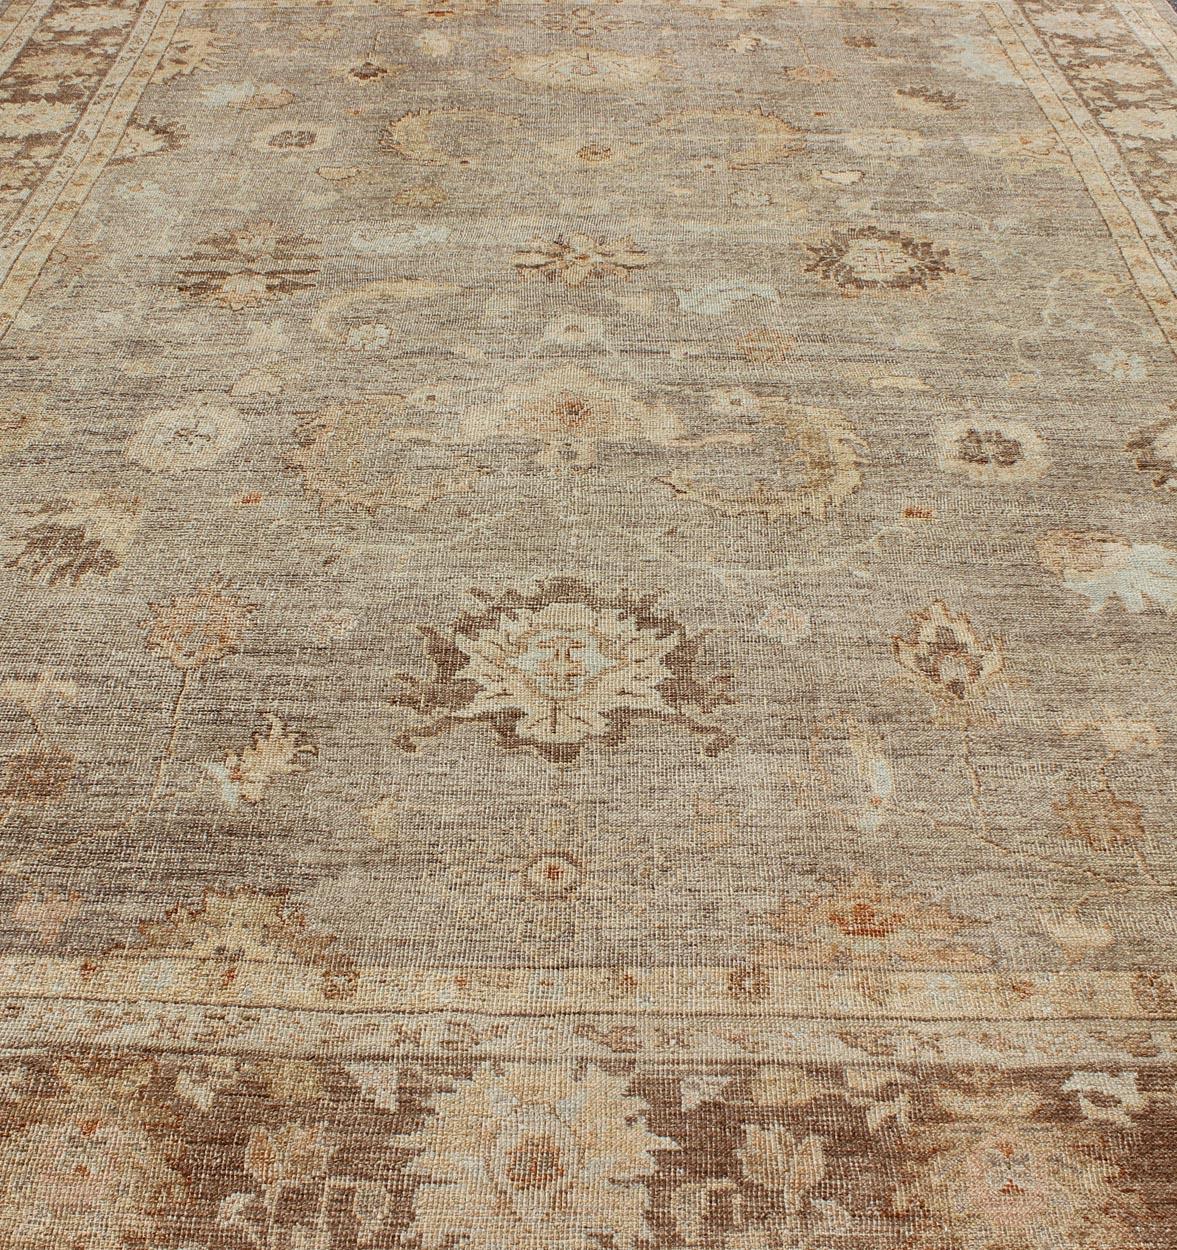 Angora Oushak Turkish Rug in Warm Colors of Taupe, Gray, Brown, Cream In Good Condition For Sale In Atlanta, GA